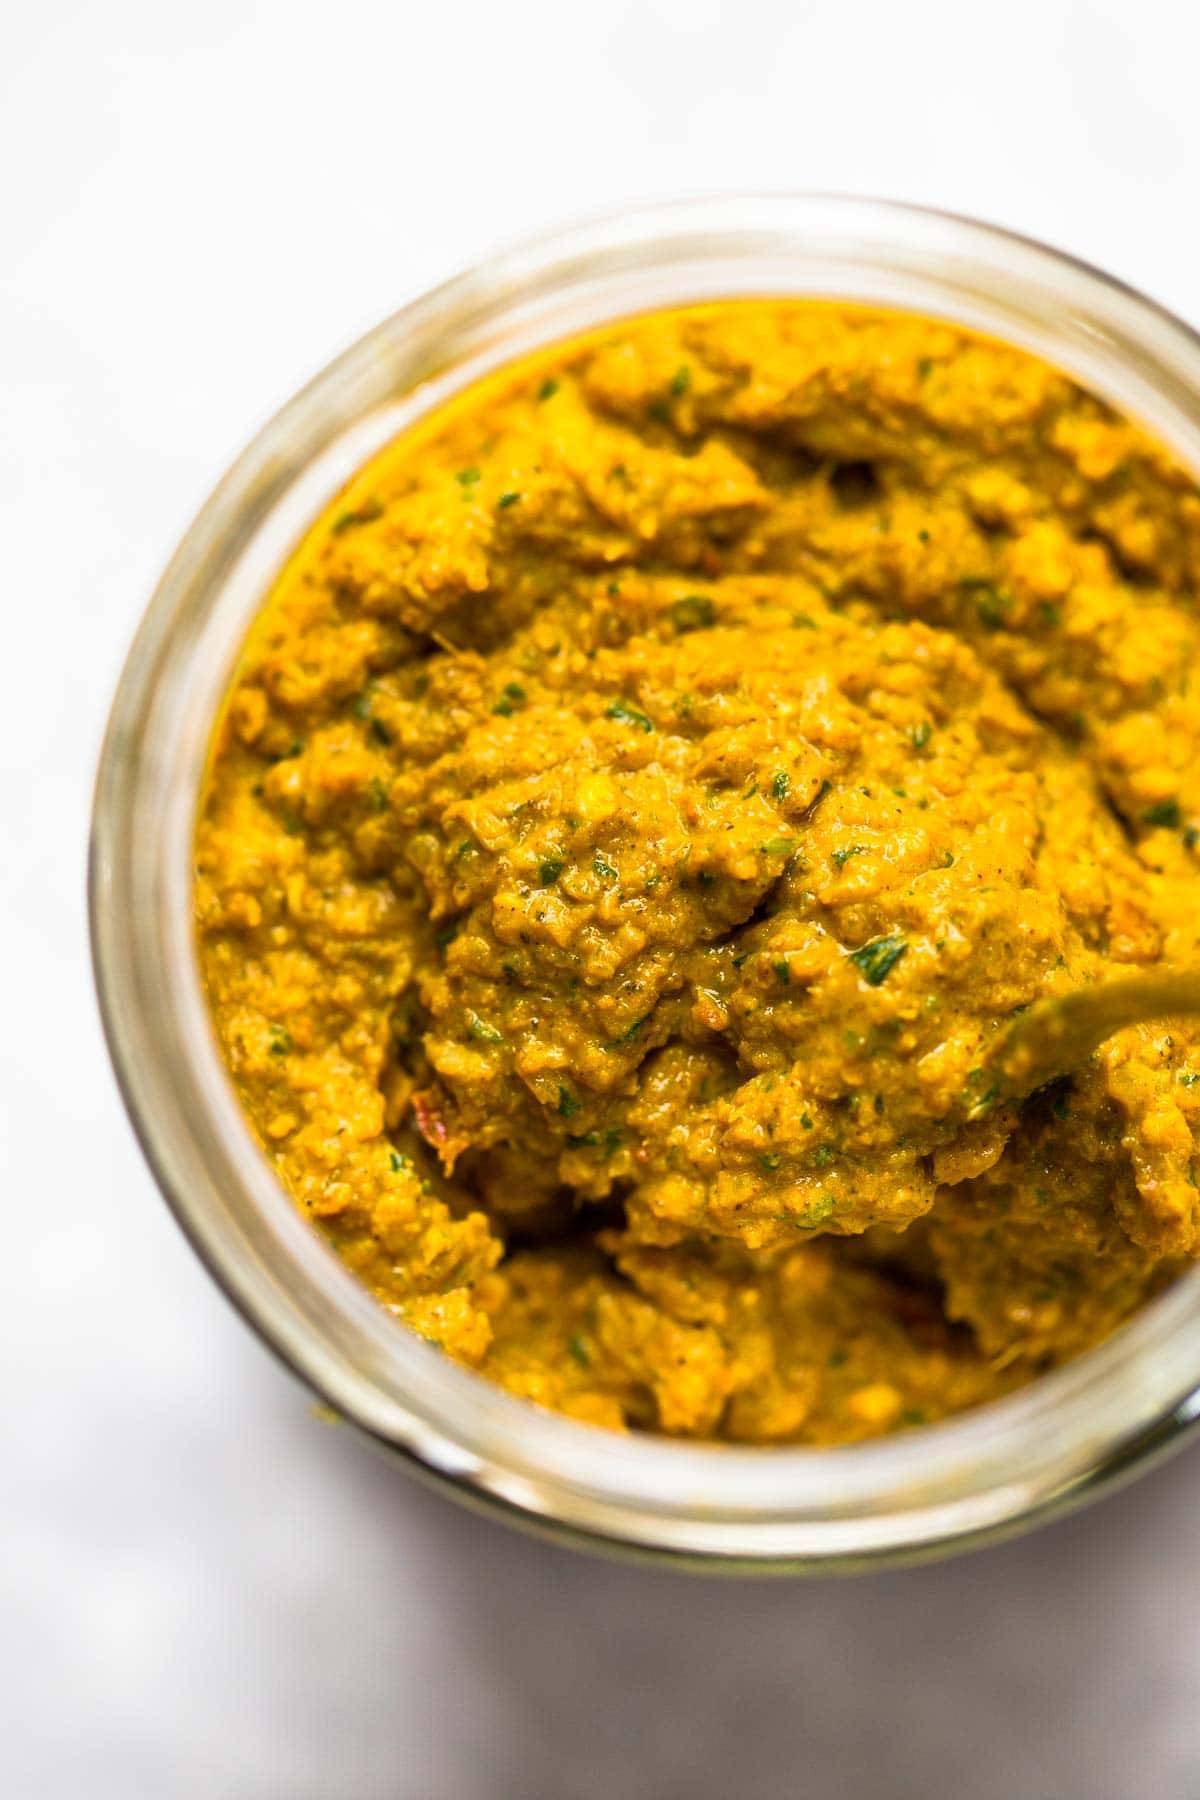 Homemade yellow curry paste in jar with spoon.